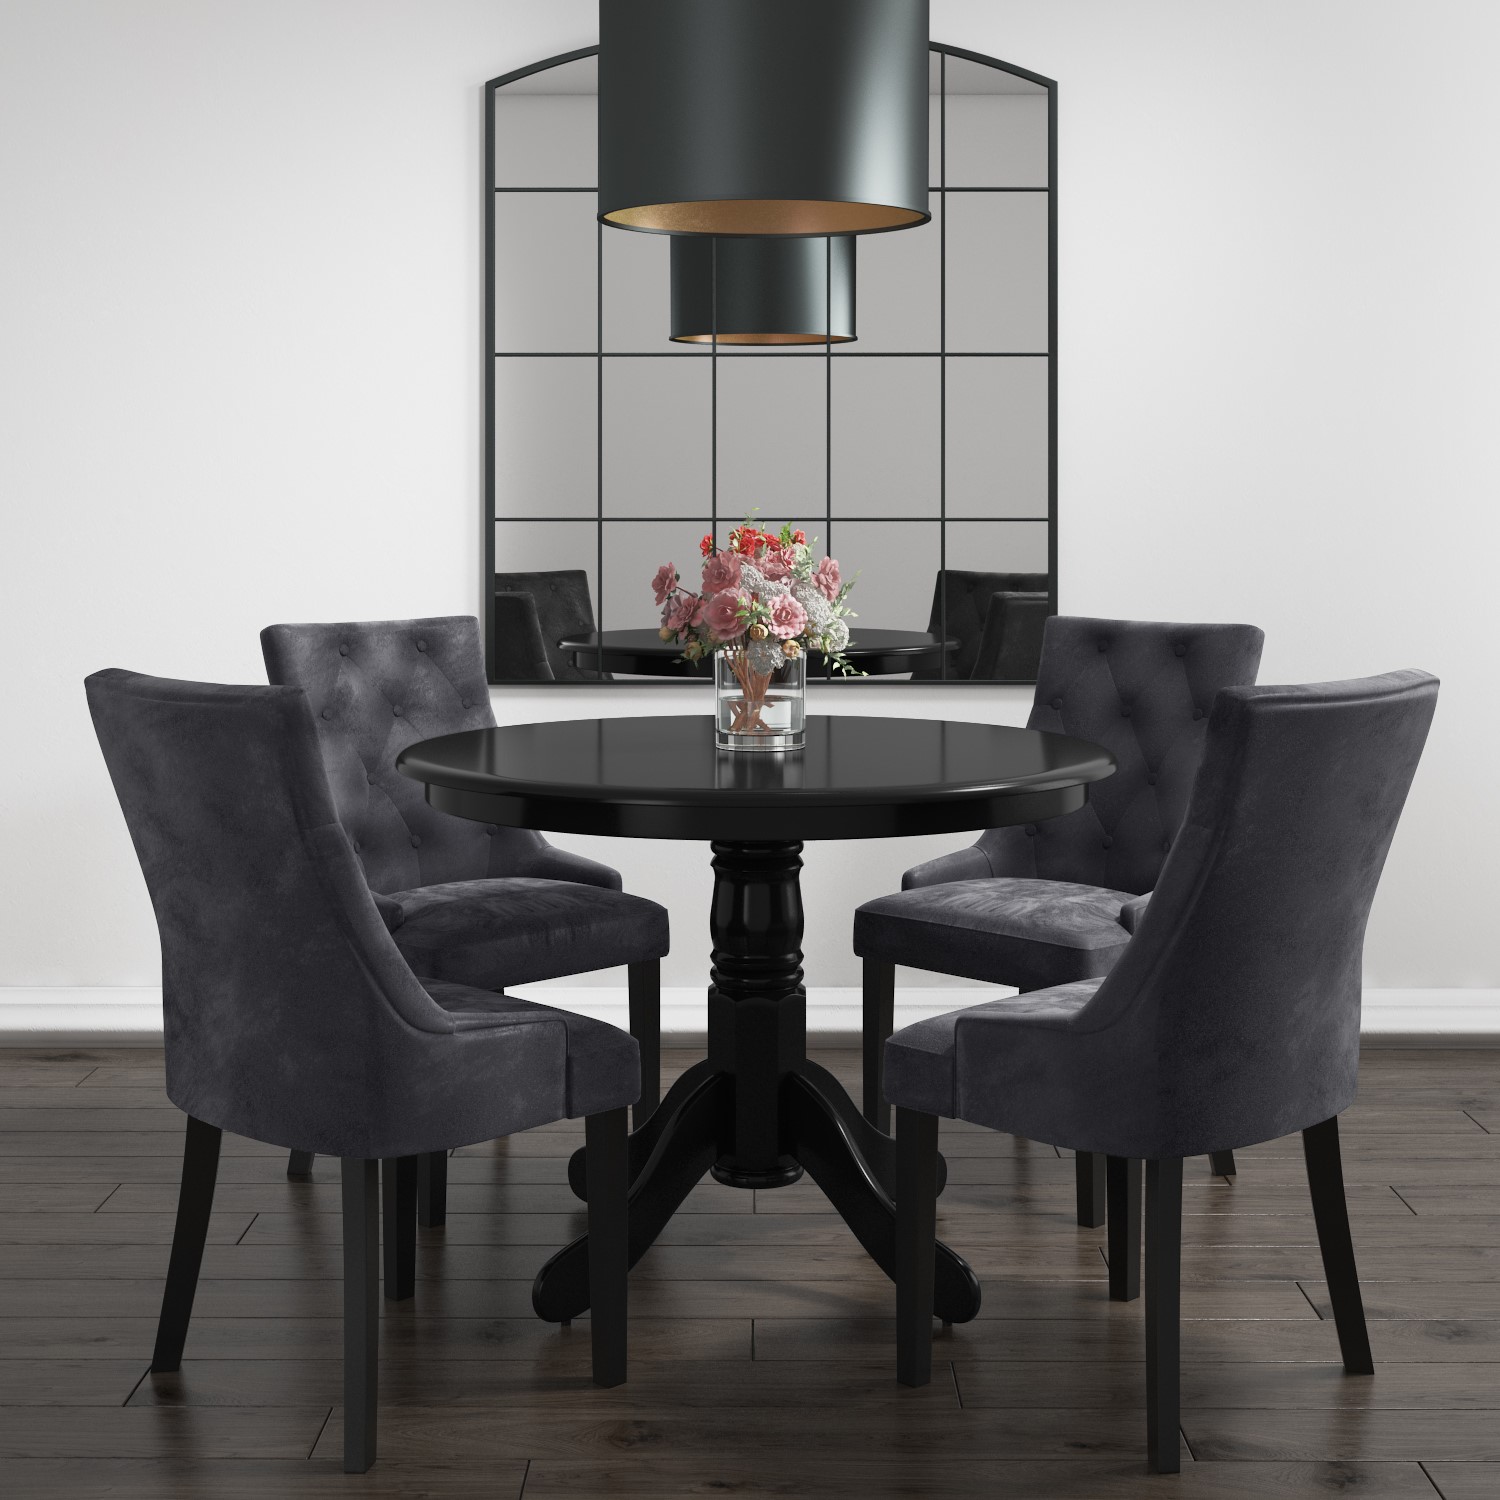 Small Round Dining Table In Black With, Small Round Dining Table Chairs